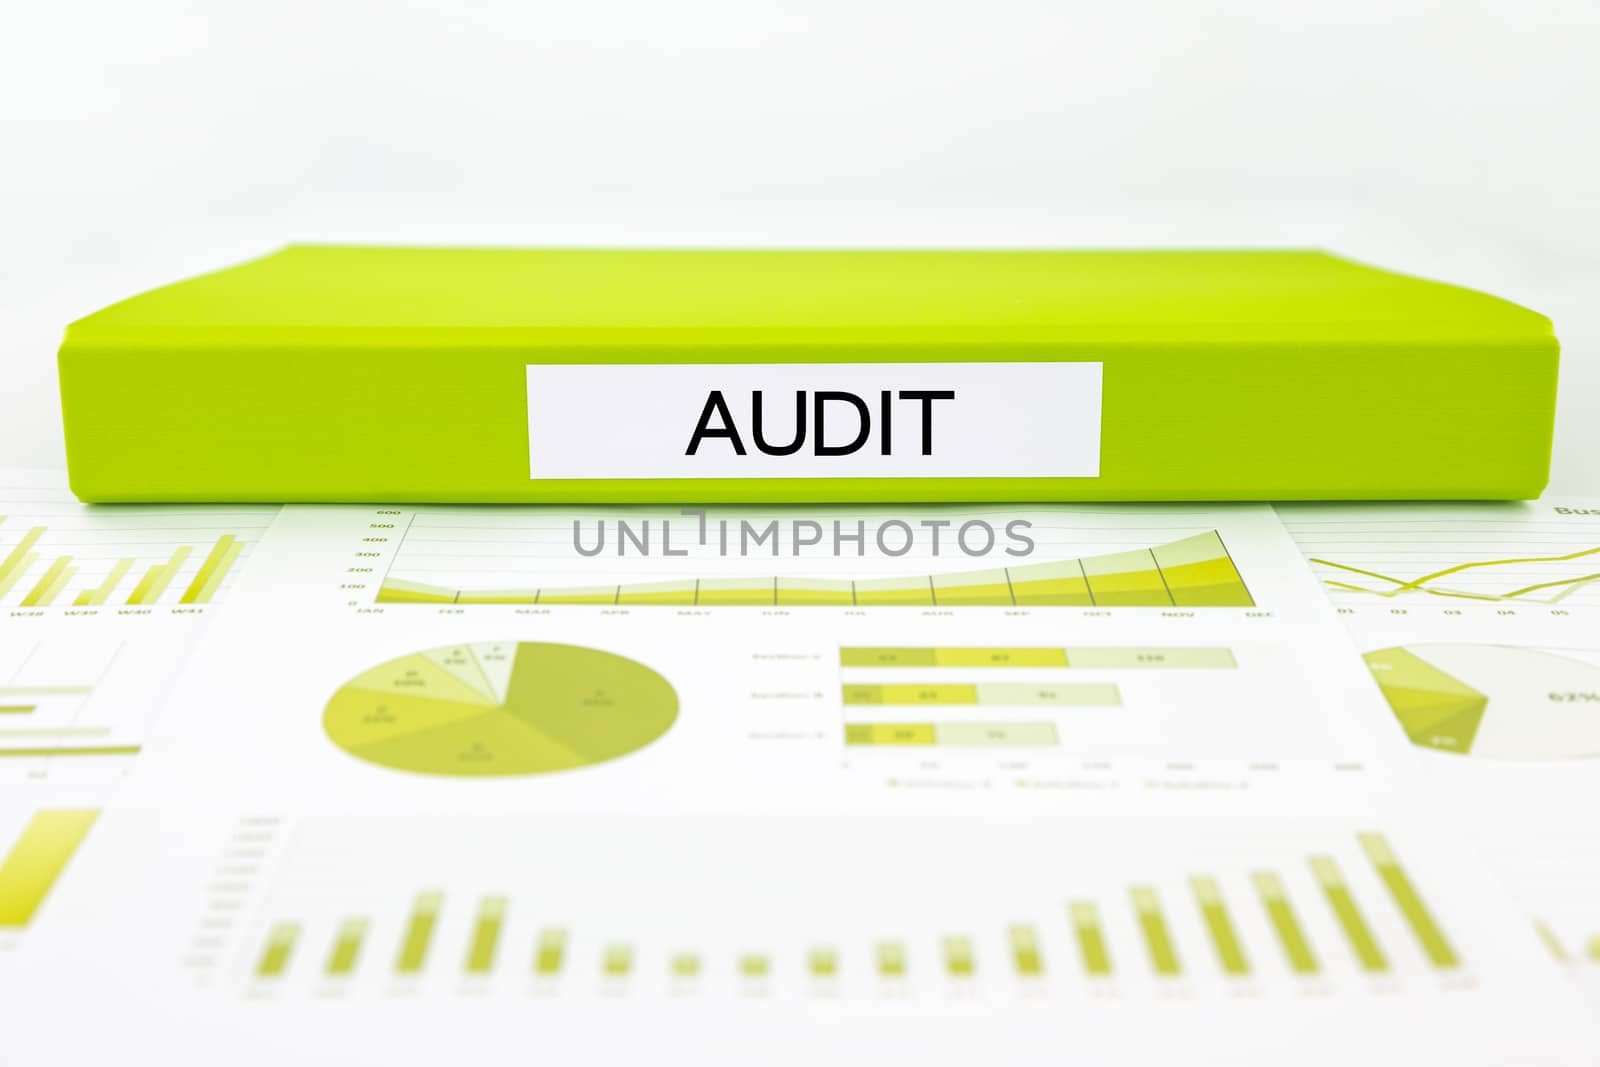 Audit reports, graphs, charts, data analysis and evaluation docu by vinnstock